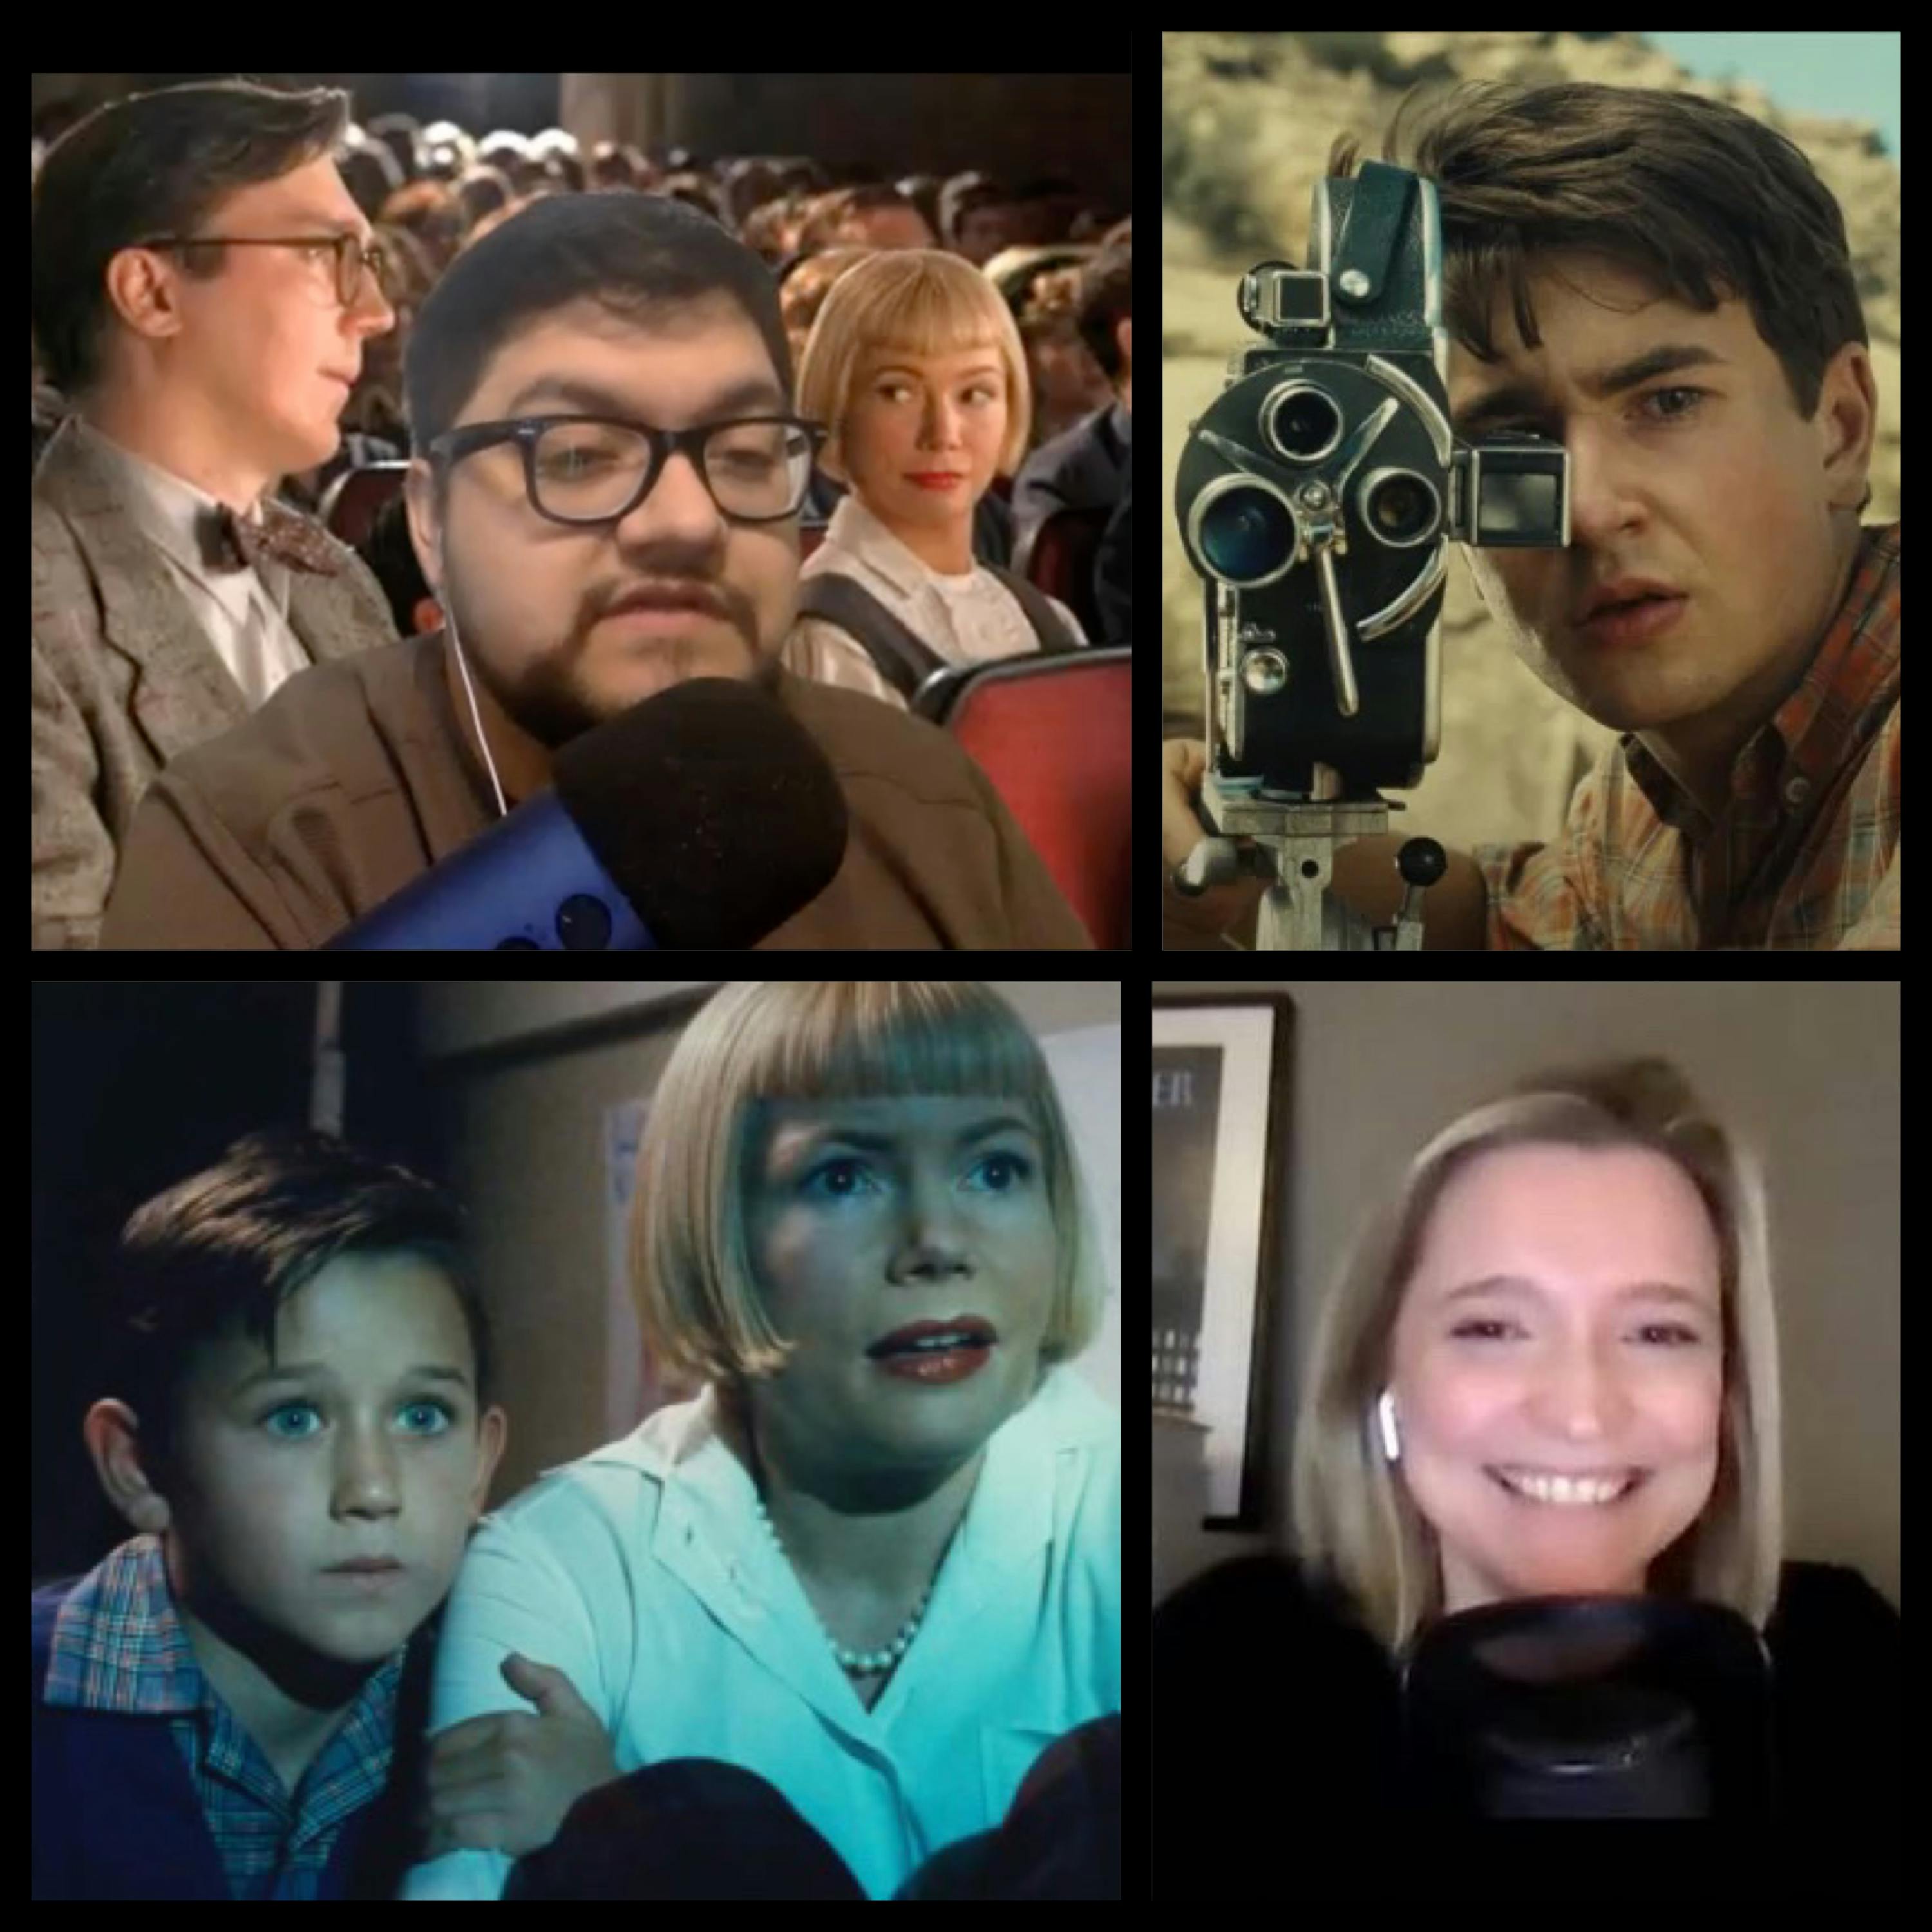 318: So, what did we think?! Ryan McQuade (AwardsWatch, InSession Film) is back to discuss Spielberg's The Fabelmans!